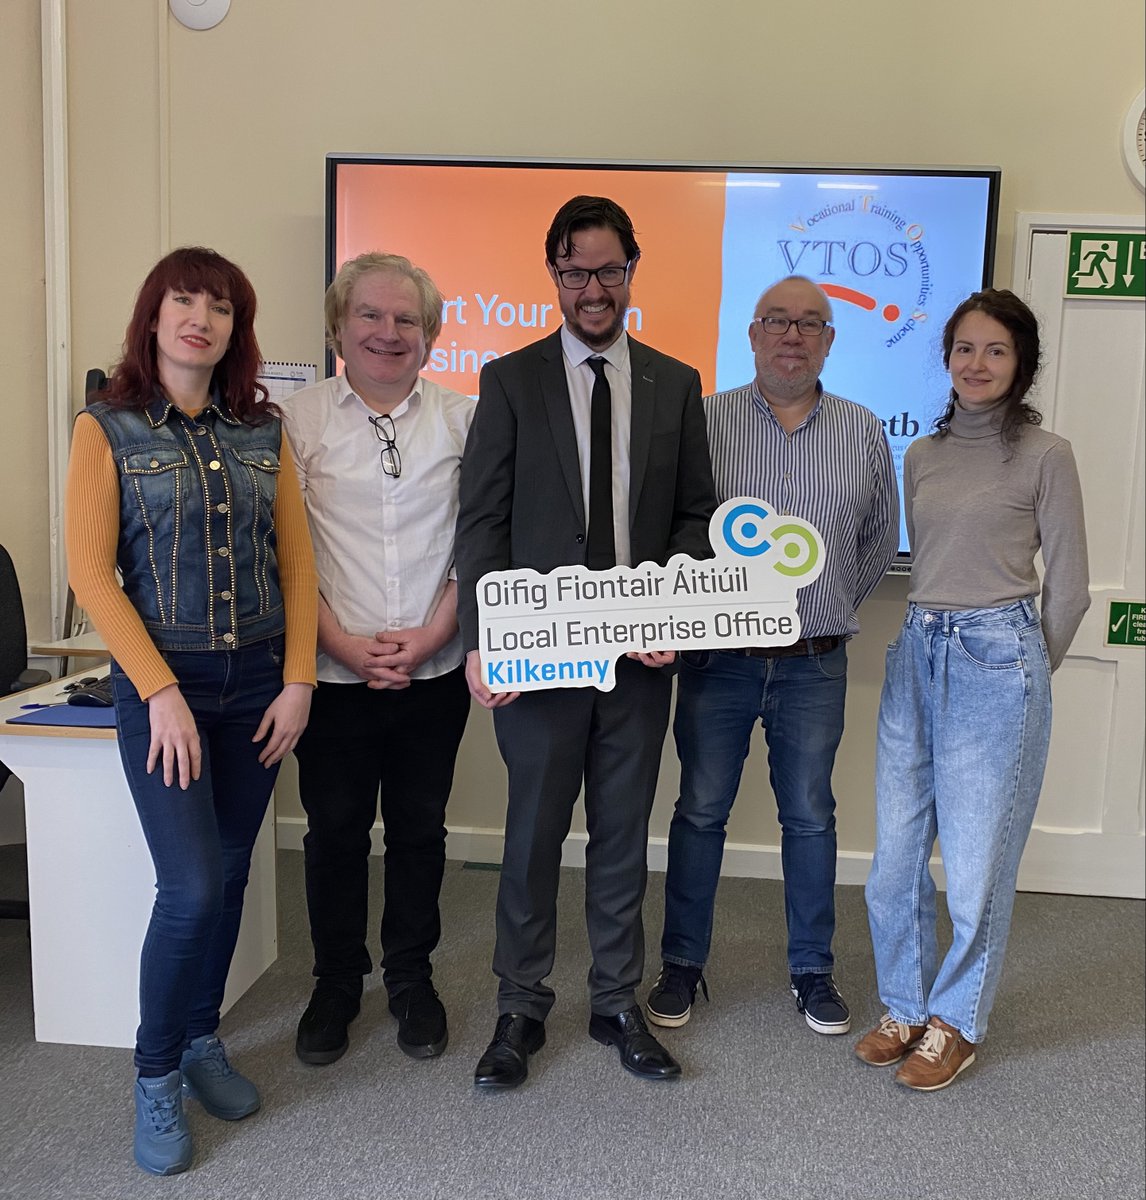 LEO Kilkenny recently linked in with @KCETB VTOS Students working on a Start Your Own Business Programme. LEO Kilkenny listened to pitches from VTOS students and spoke about supports available for SME’s in Kilkenny. Thank you KCETB! 🤝 #MakingItHappen